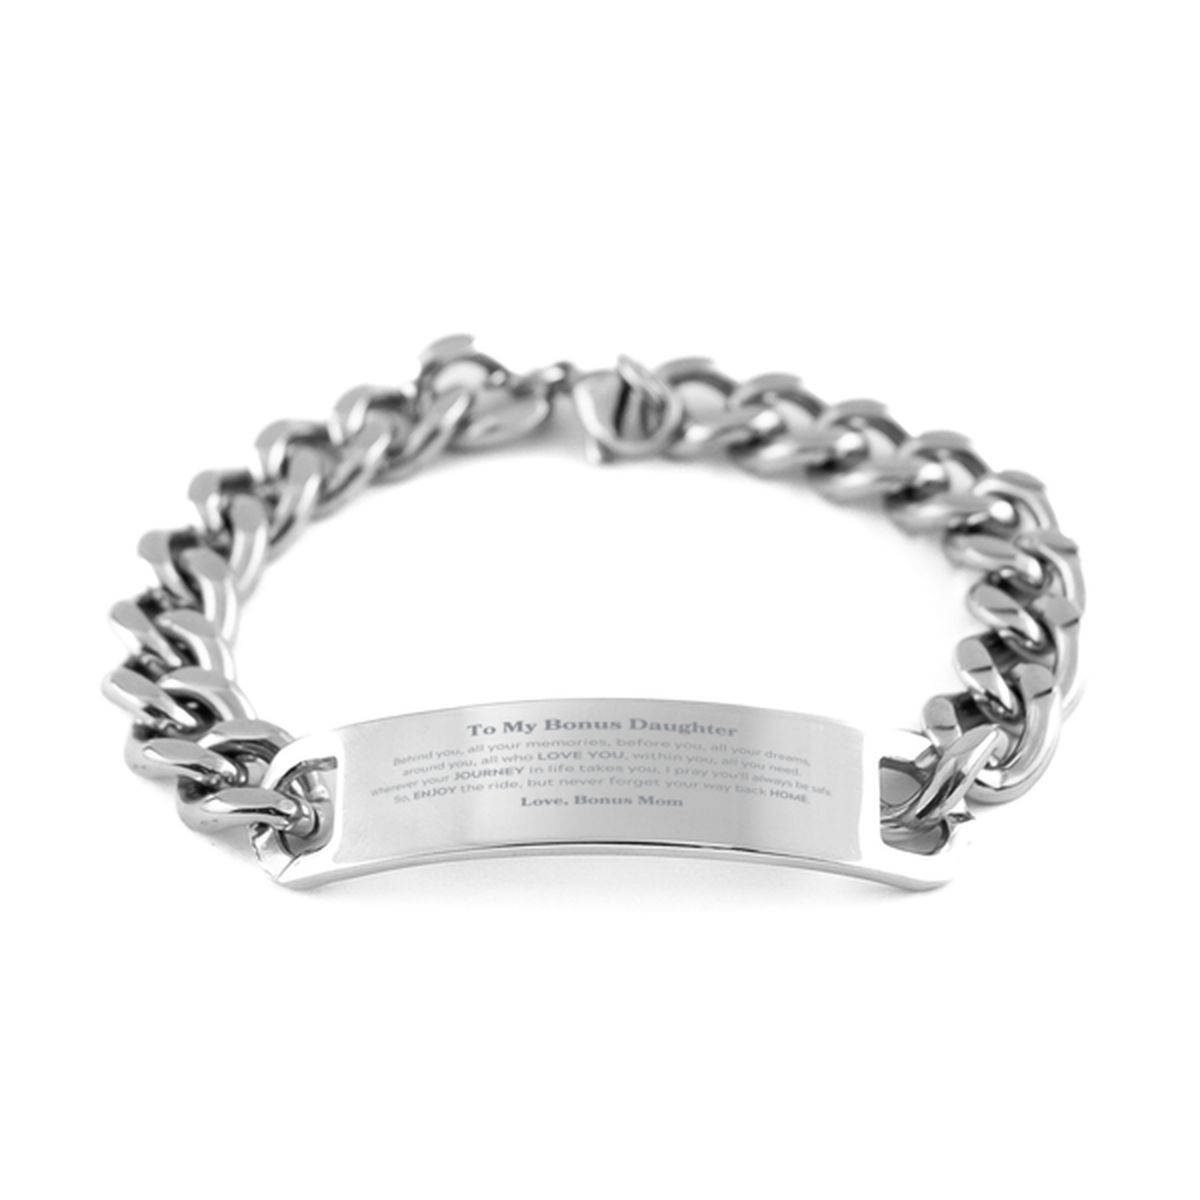 To My Bonus Daughter Graduation Gifts from Bonus Mom, Bonus Daughter Cuban Chain Stainless Steel Bracelet Christmas Birthday Gifts for Bonus Daughter Behind you, all your memories, before you, all your dreams. Love, Bonus Mom